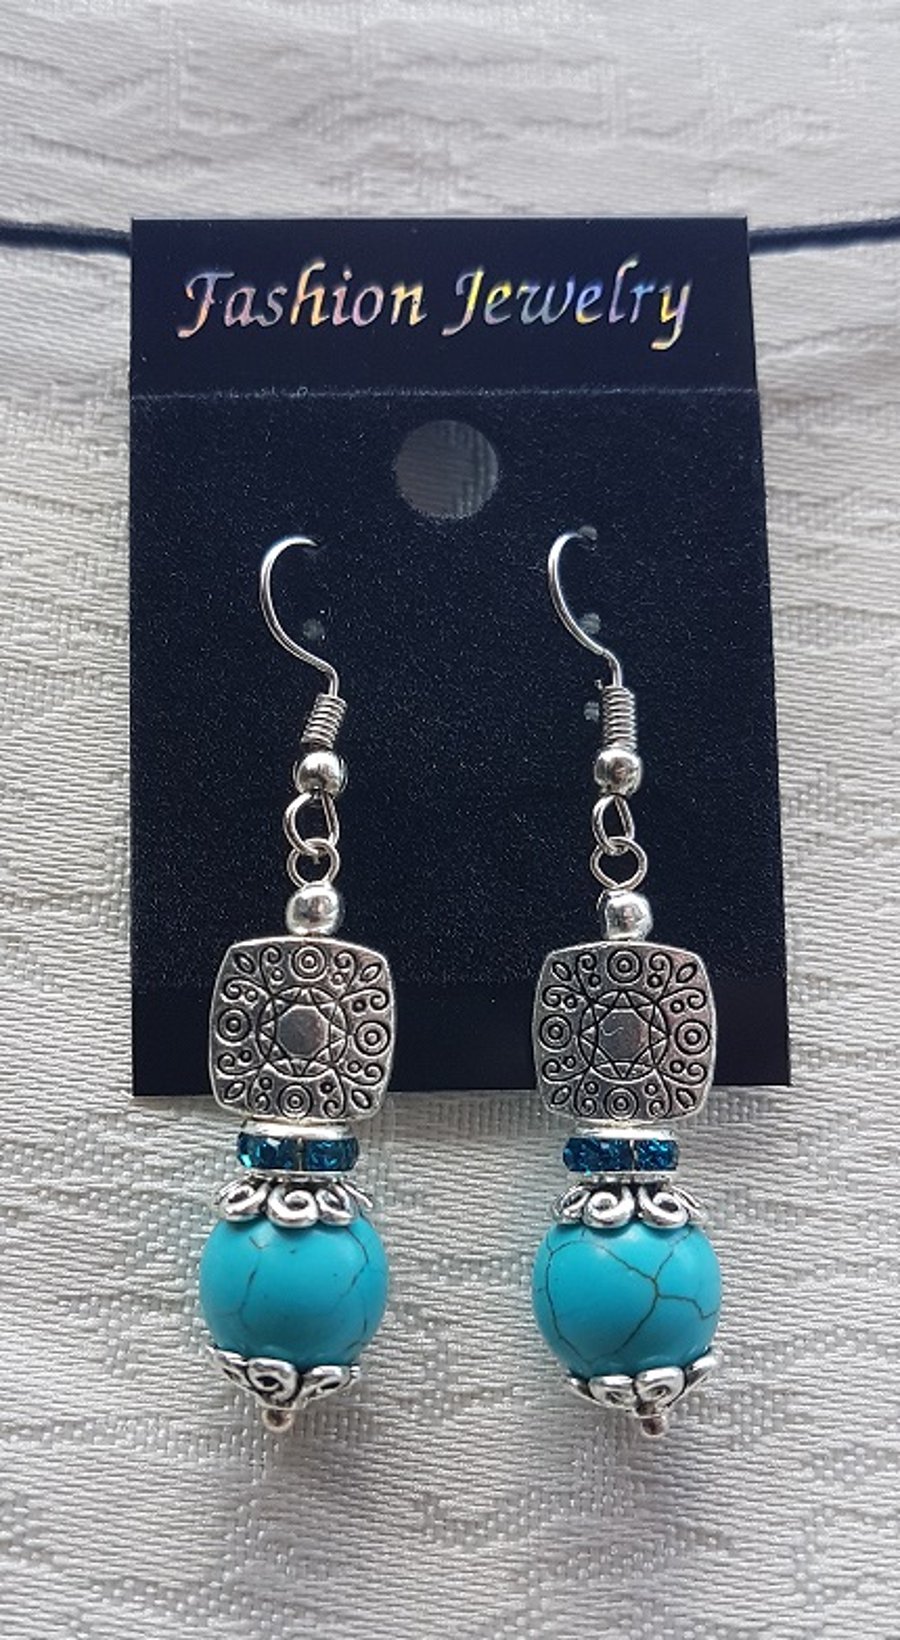 Gorgeous Turquoise and silver bead earrings